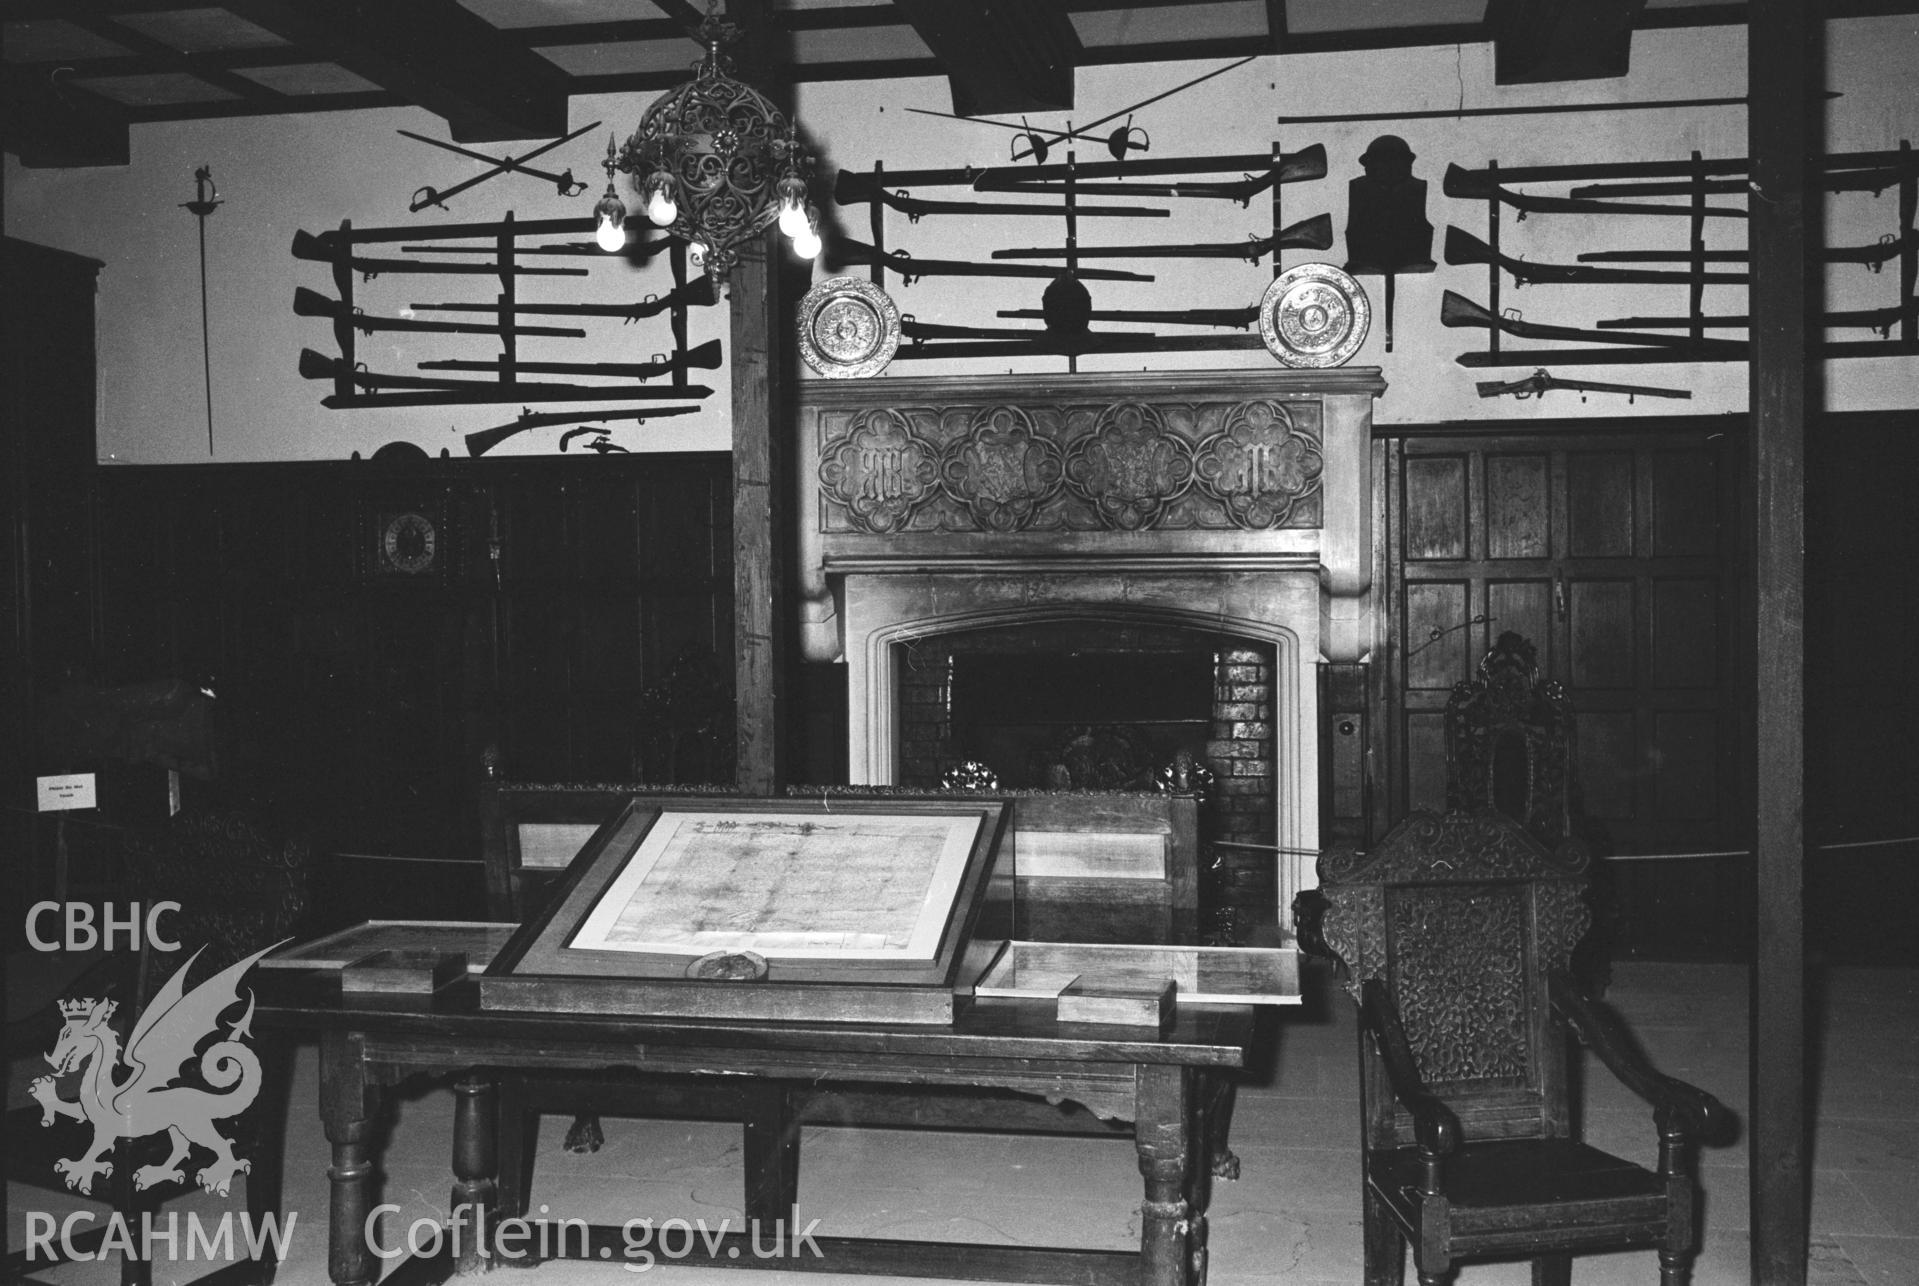 Interior view of Chirk Castle, collated by the former Central Office of Information.